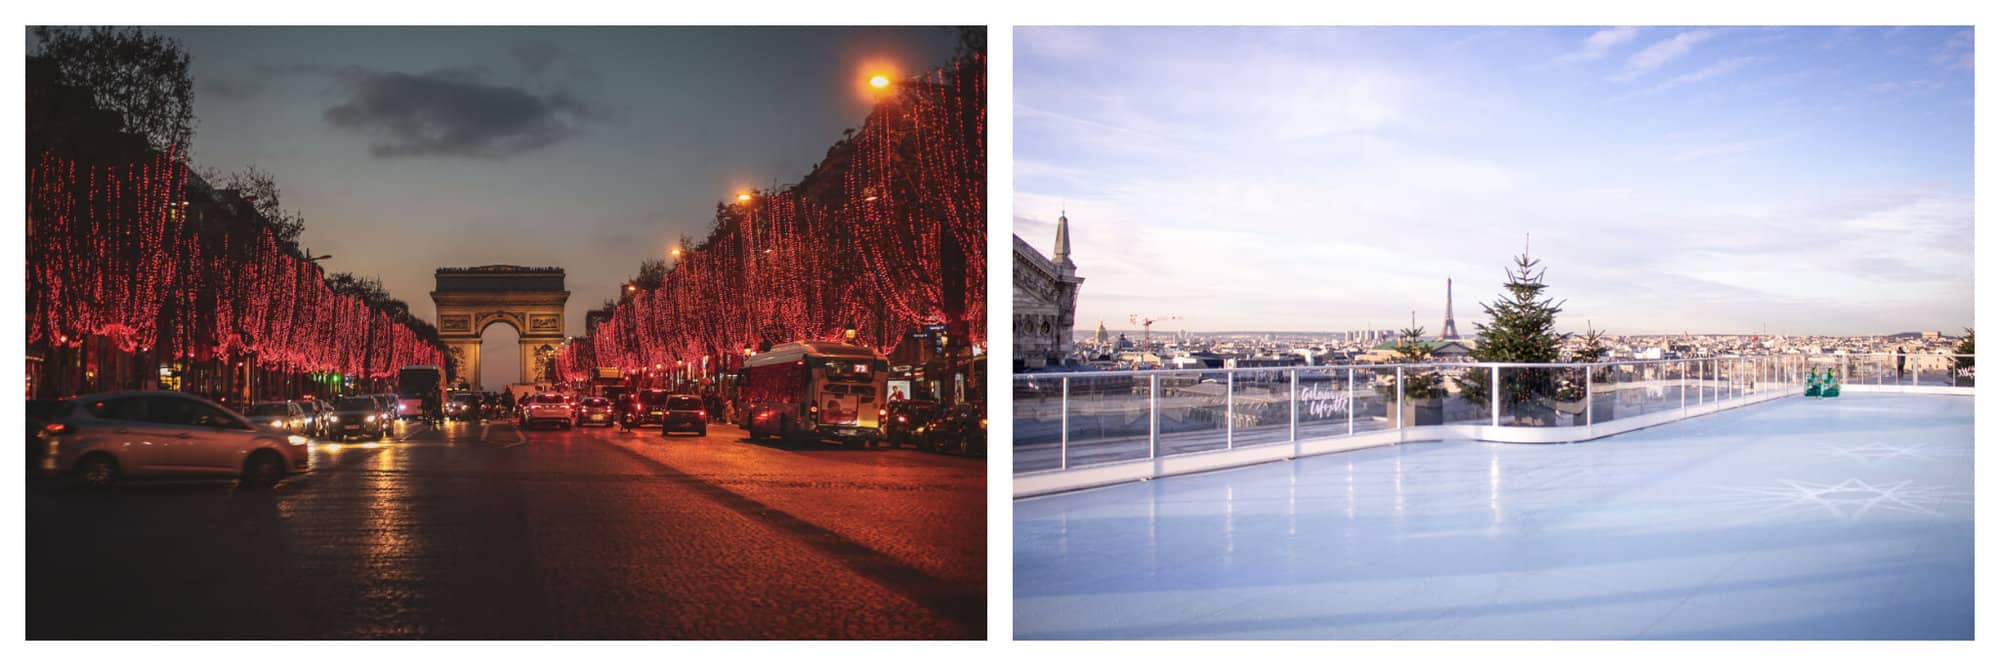 Left: a photo of the Christmas lights at Le Champs-Élysées. Right: a photo of the ice rink on top of Galeries Lafayette in Paris